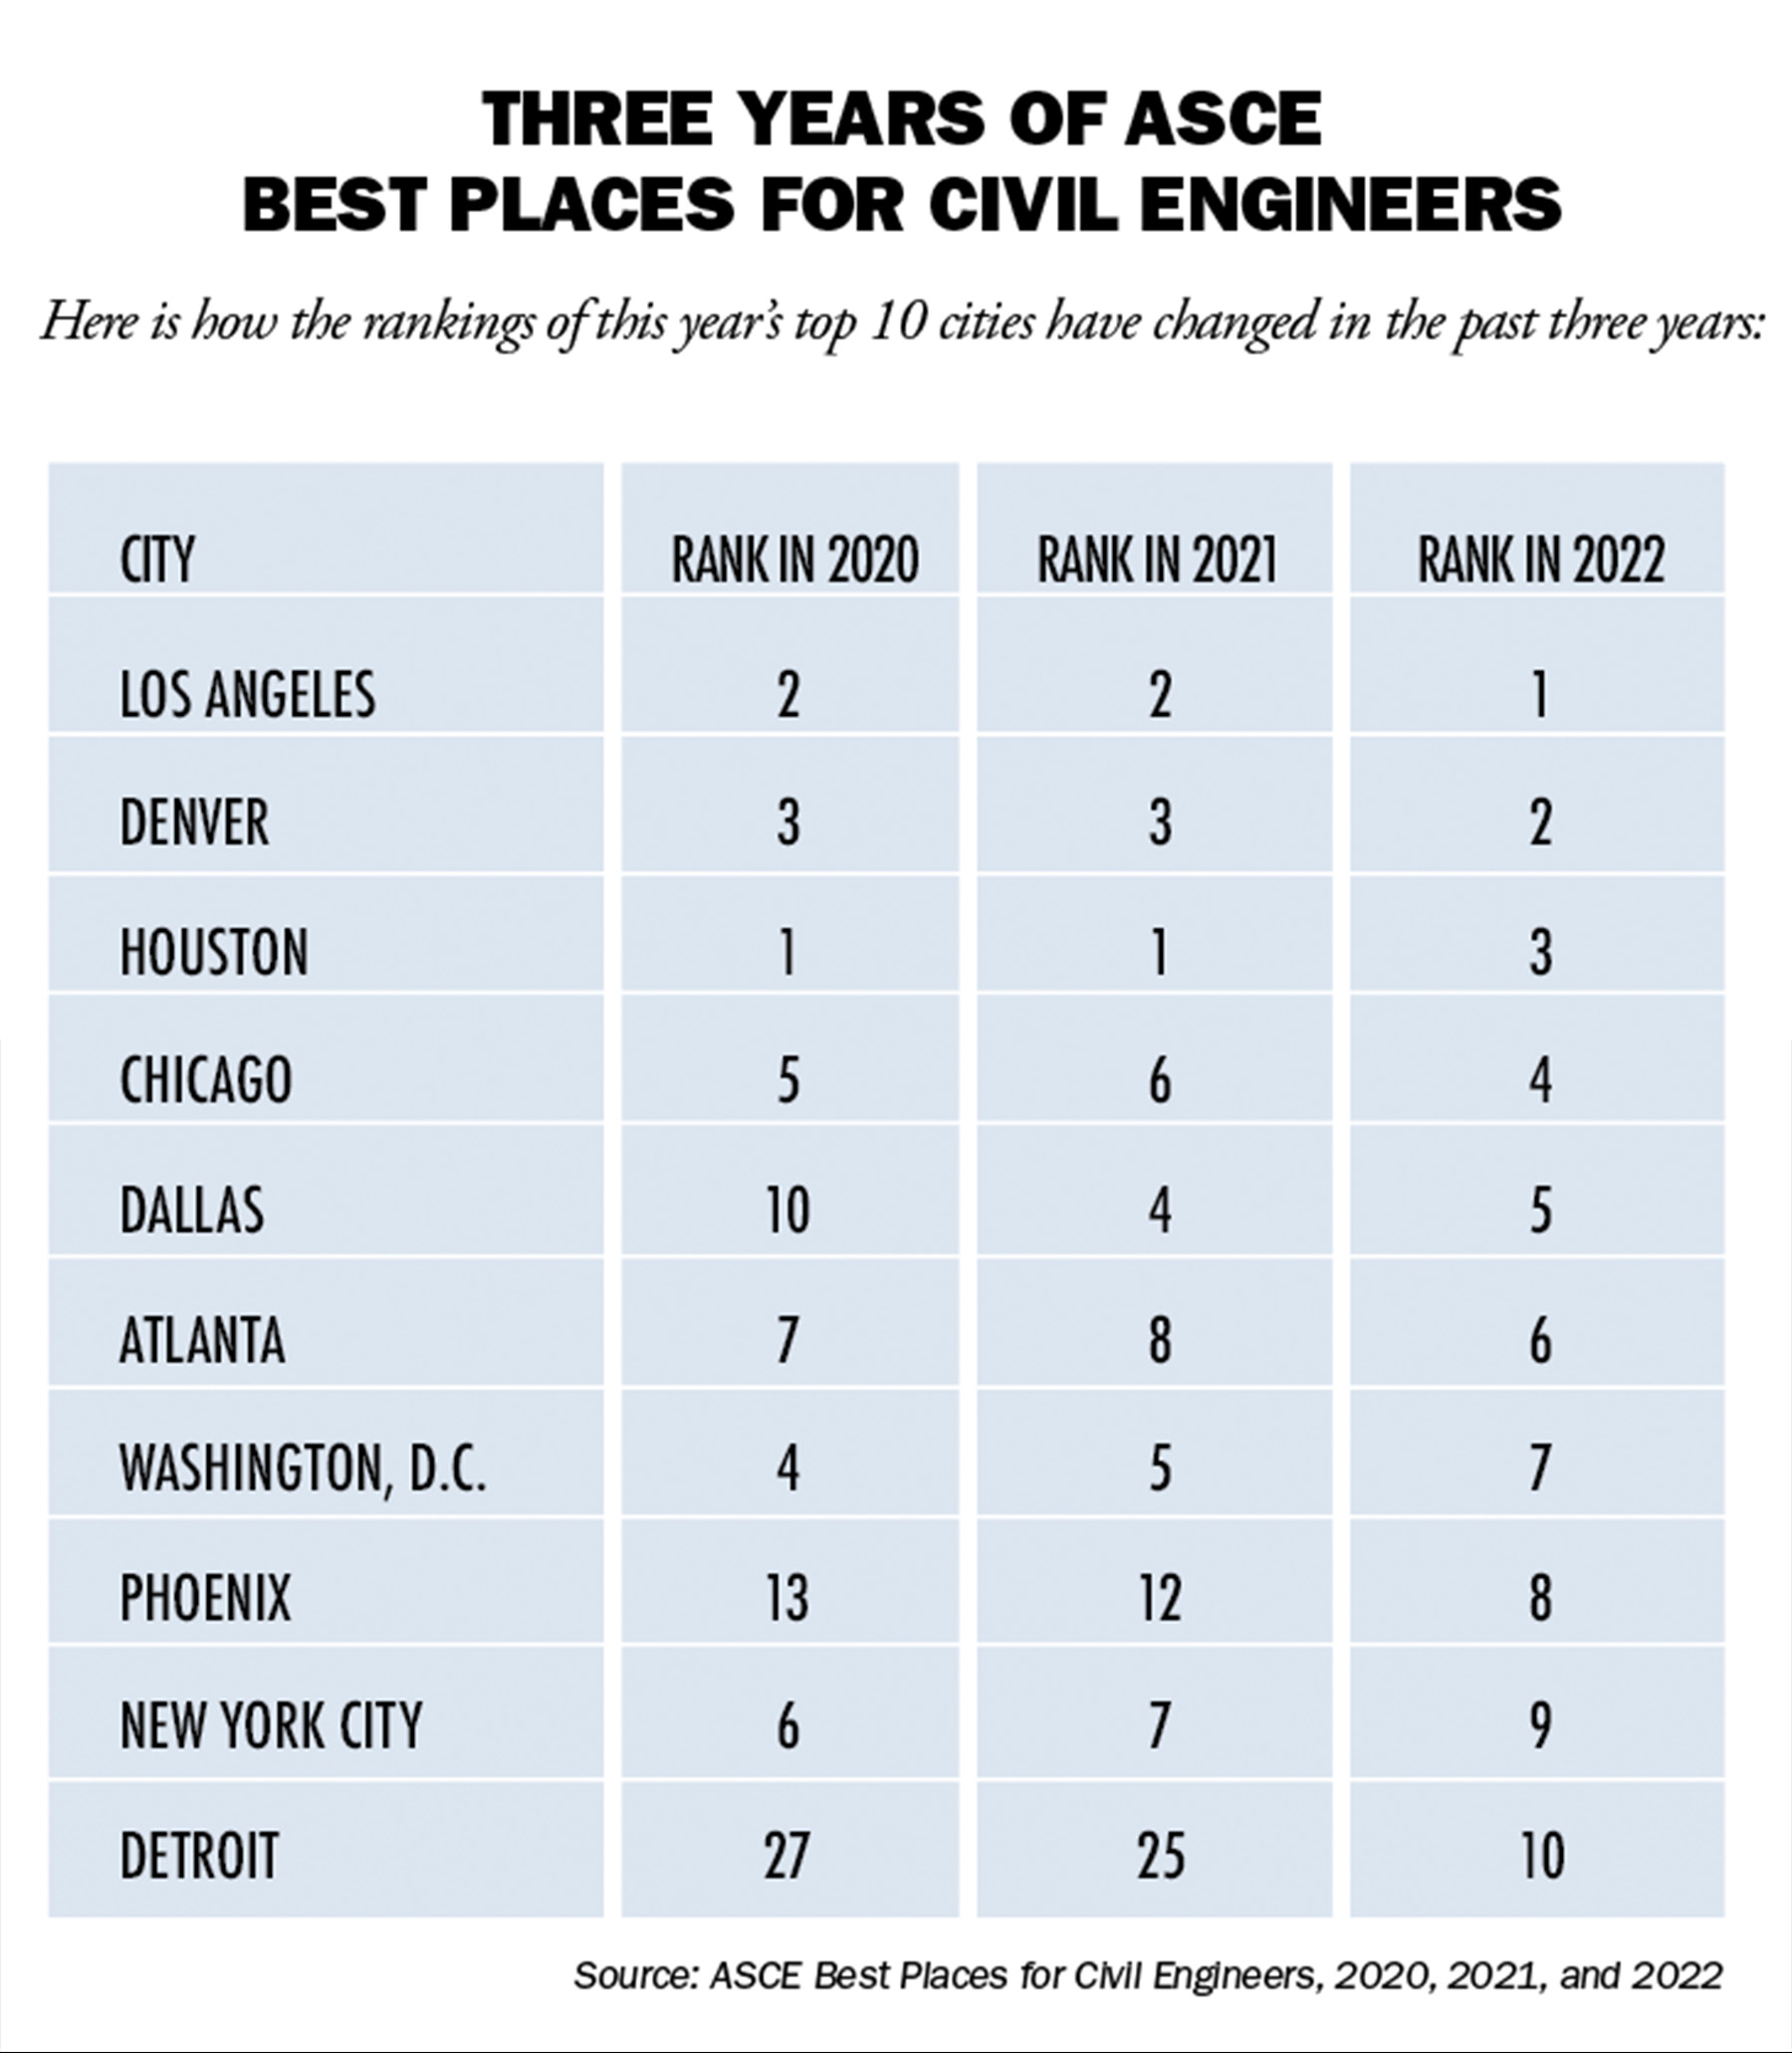 chart compares ranking of various cities that have placed in the top 10 best places for civil engineers in 2020, 2021, and 2022 